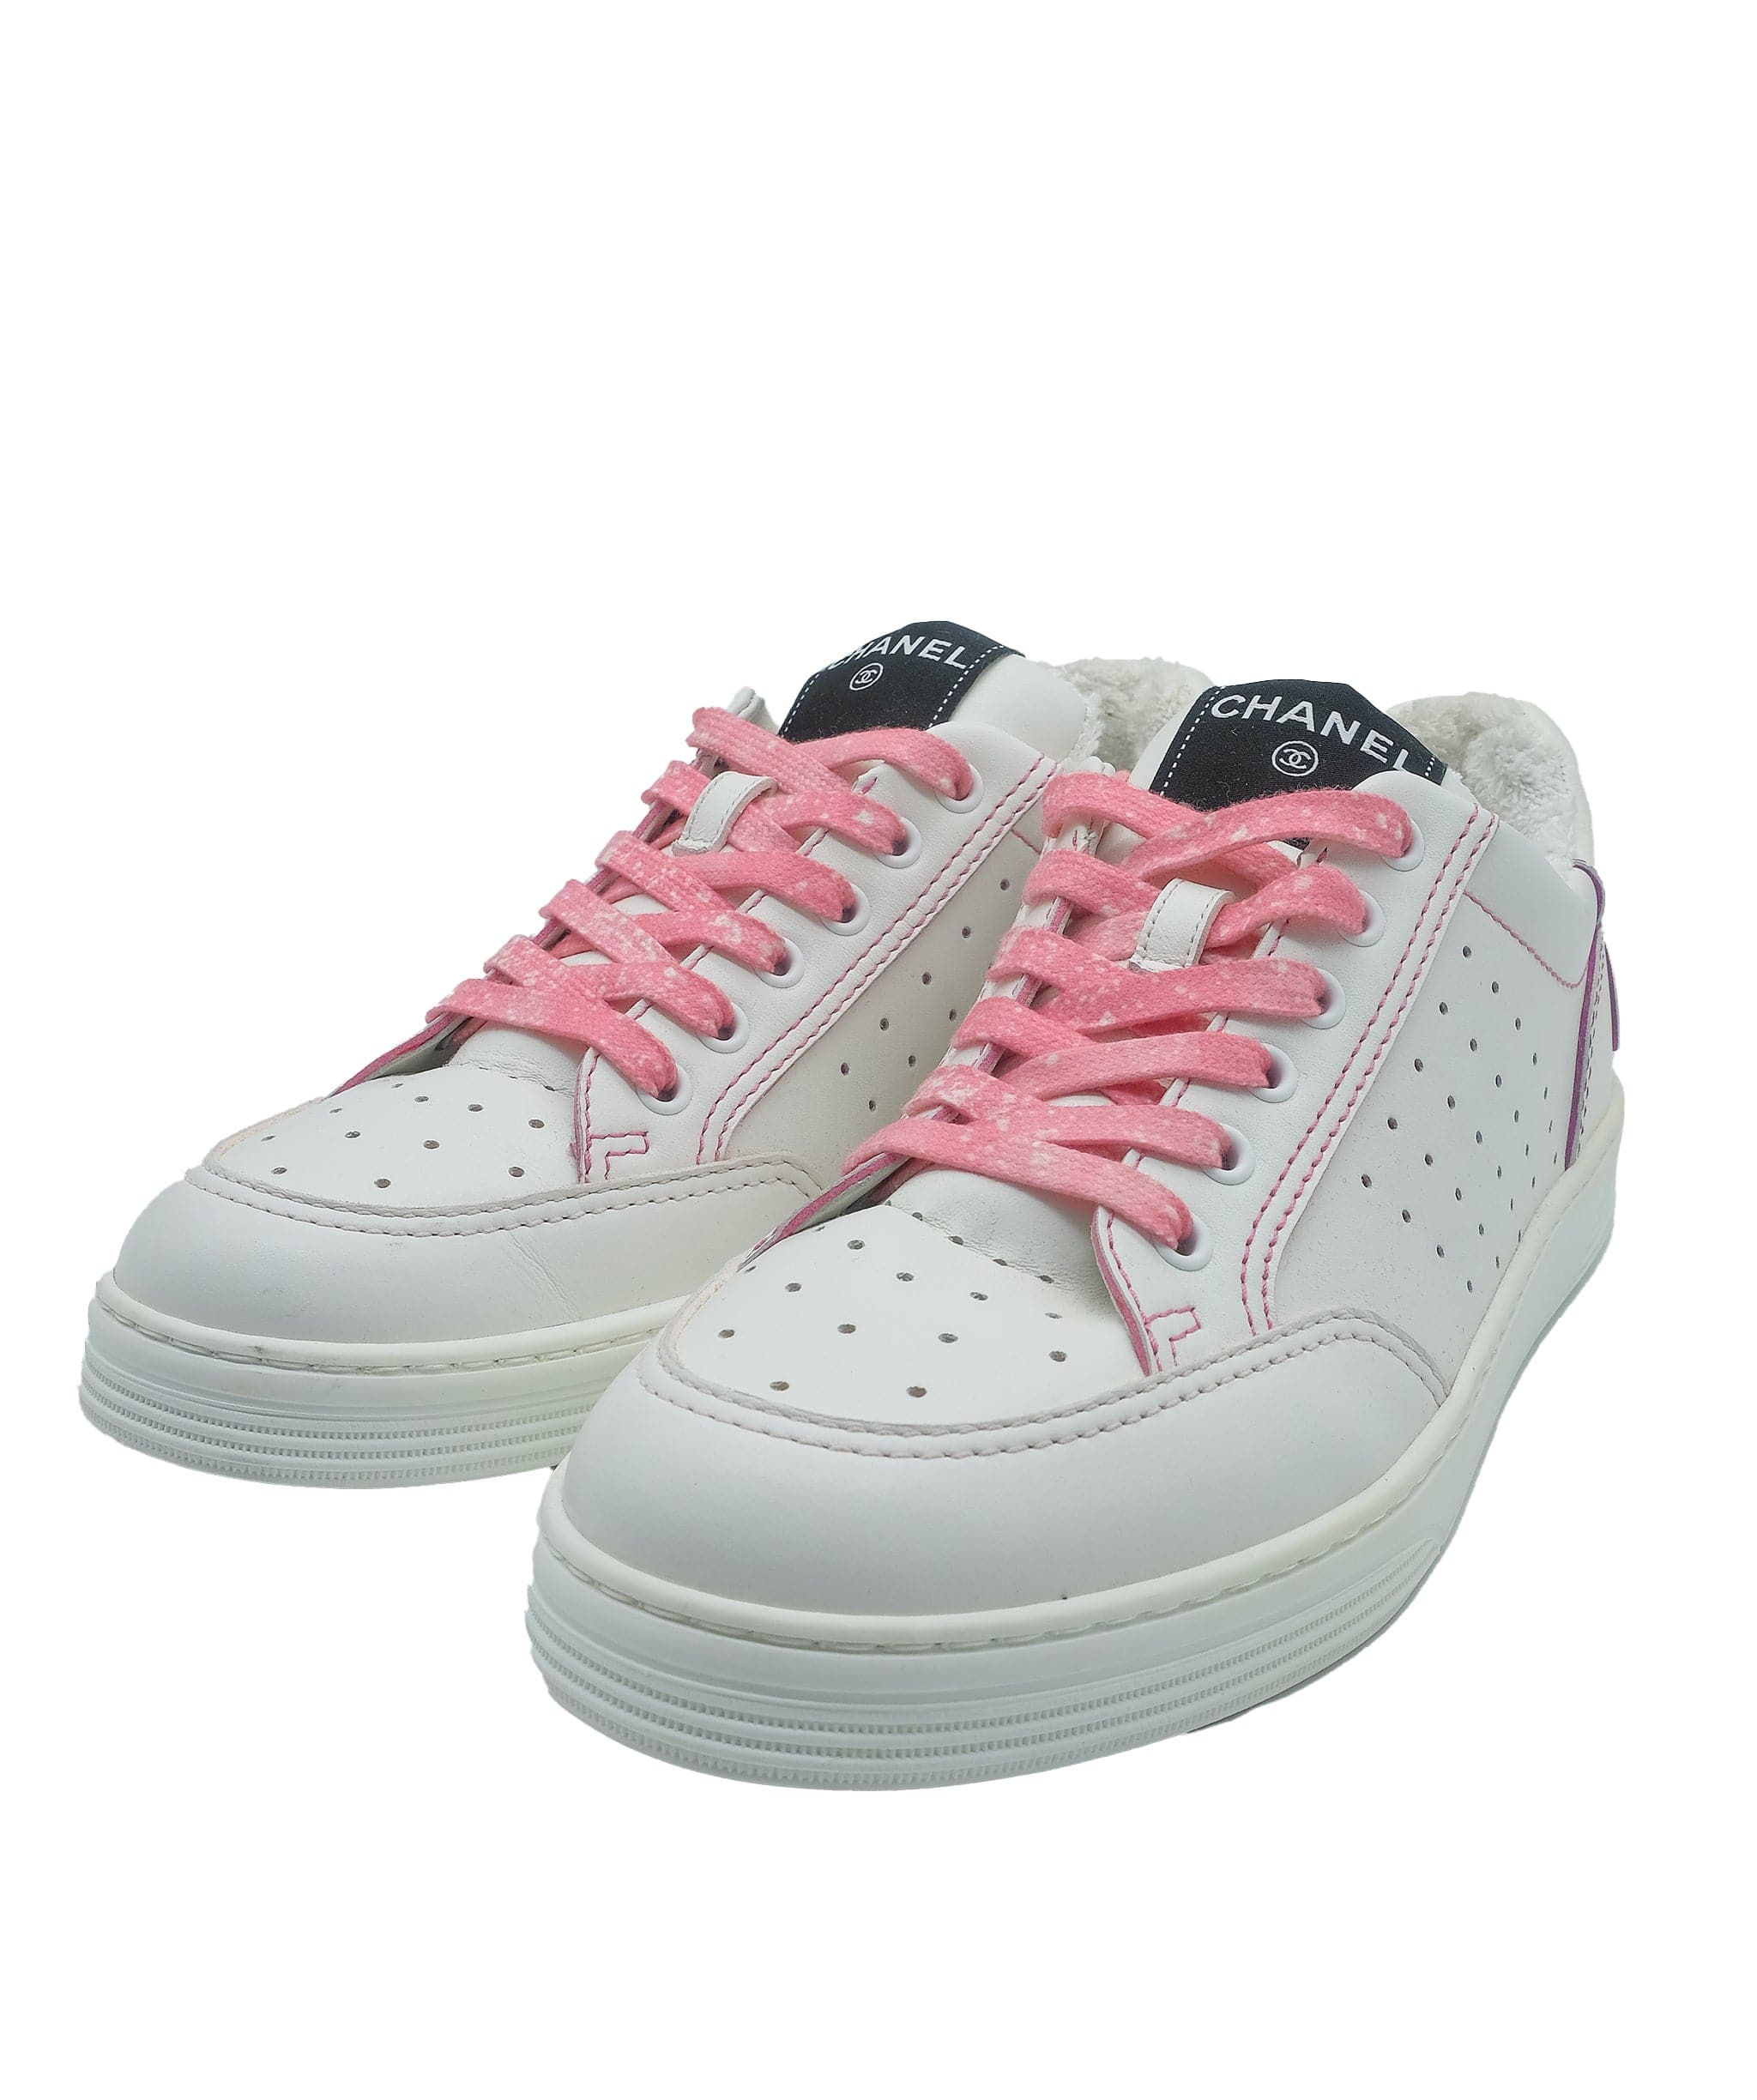 Chanel Chanel Pink Sneakers 40